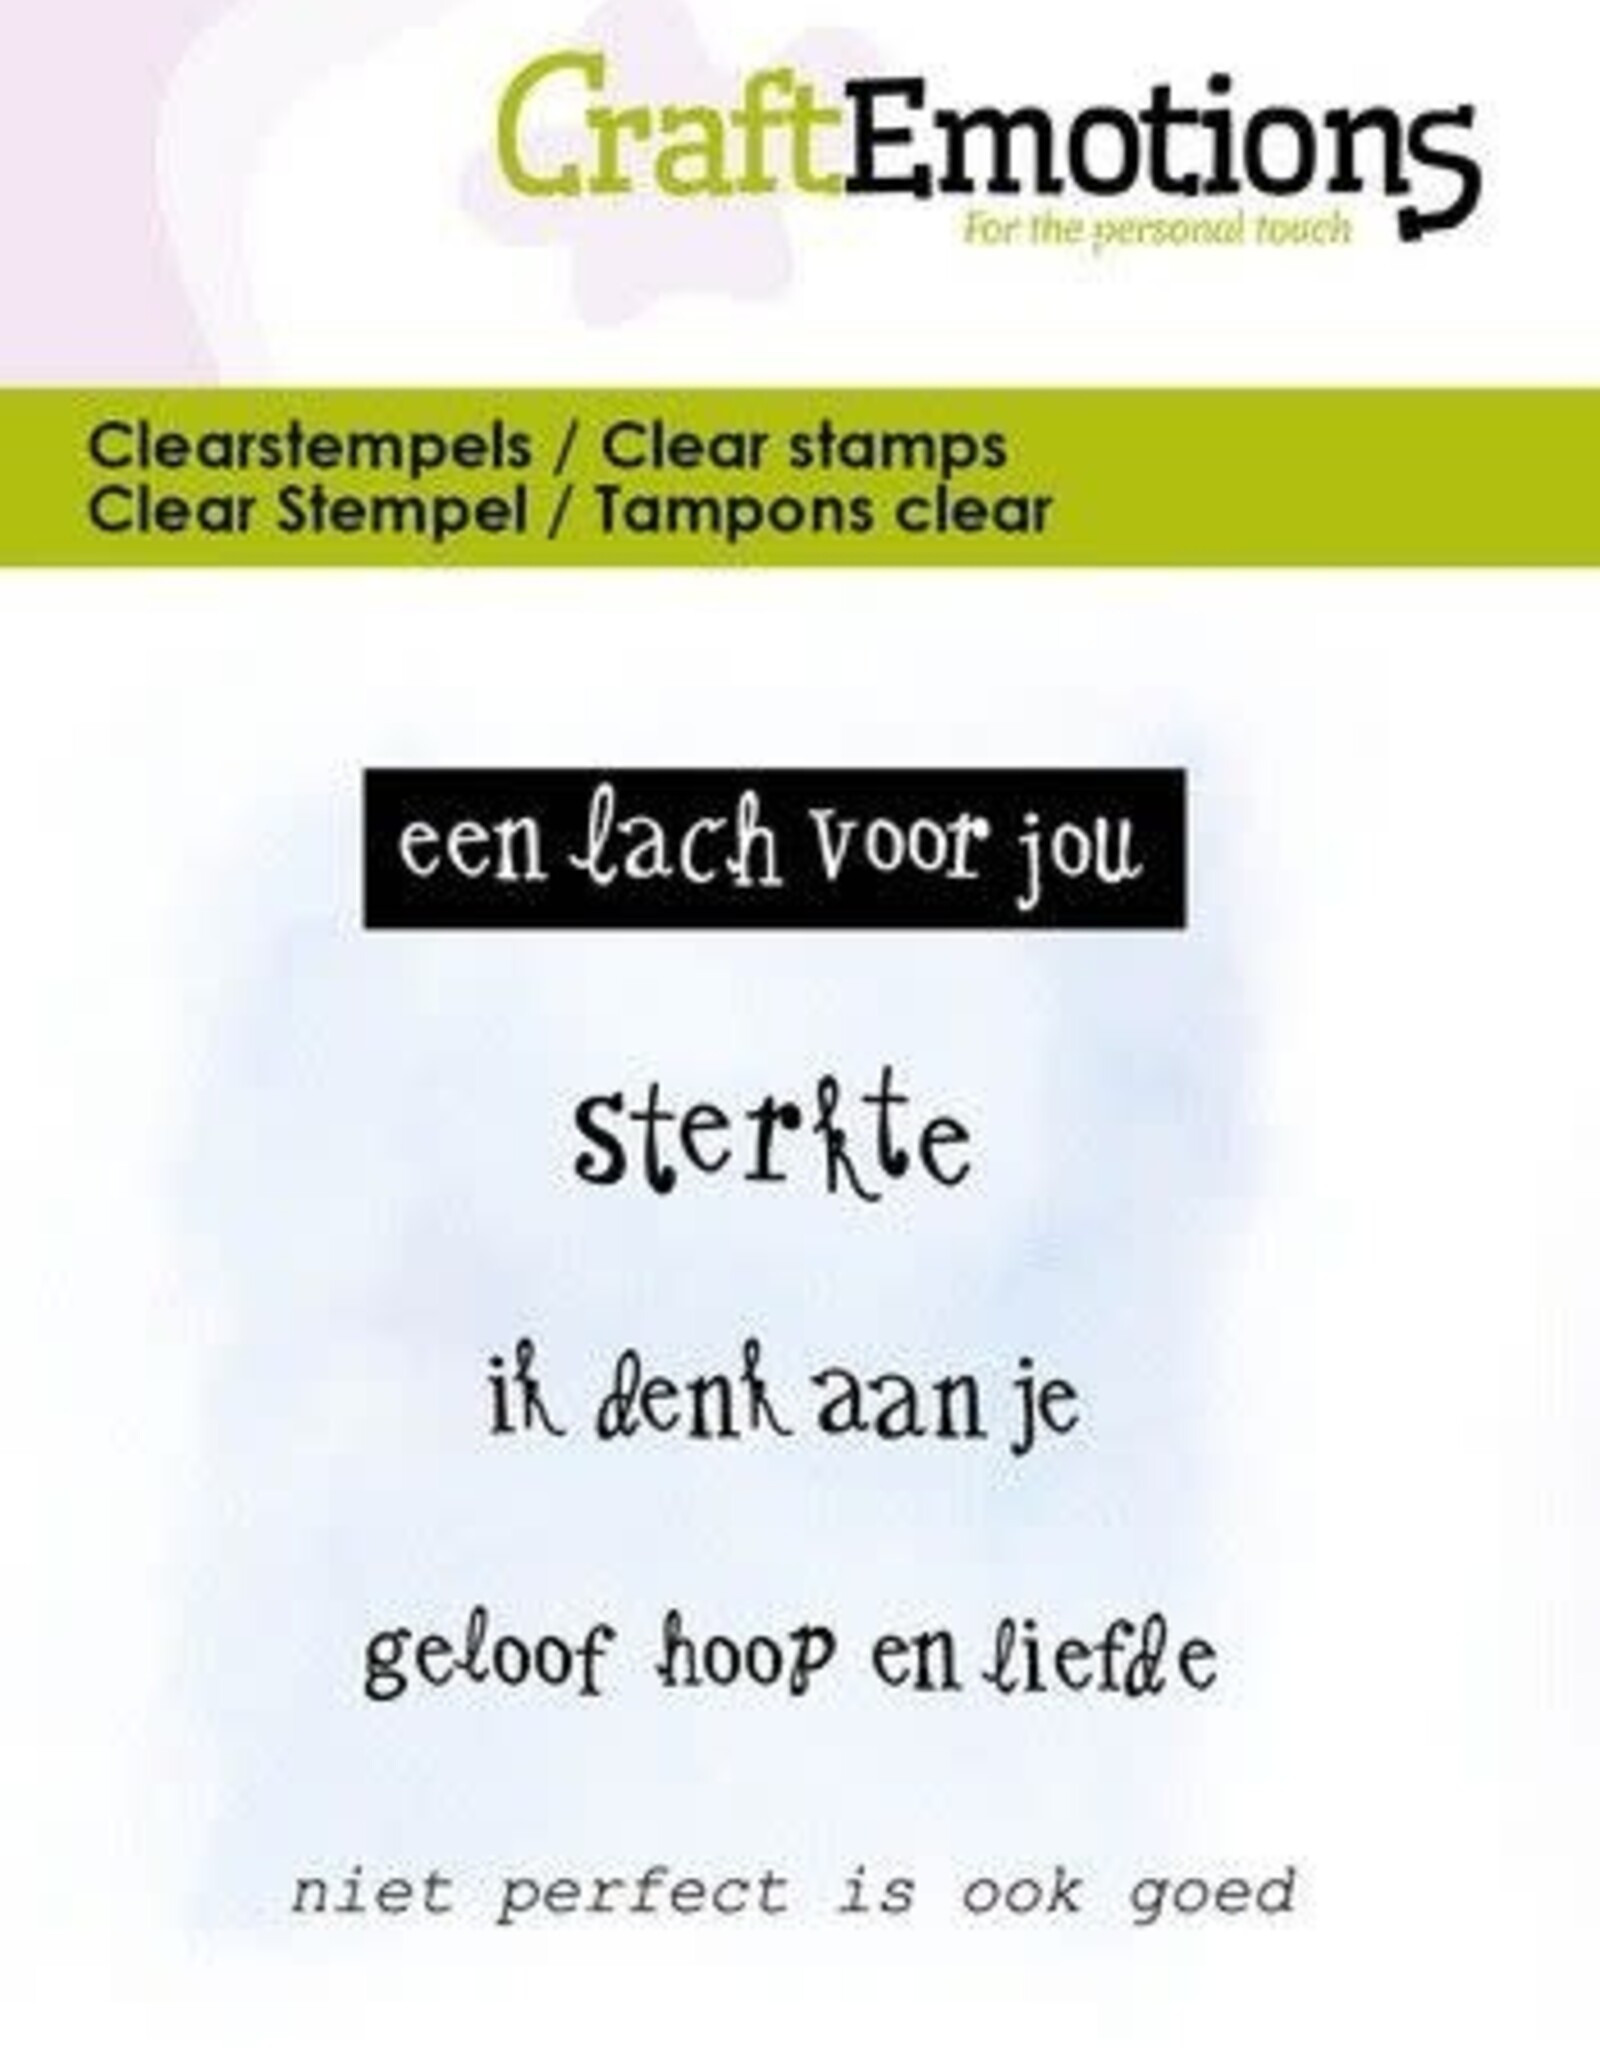 Craft Emotions CraftEmotions clearstamps 6x7cm - Een lach voor jou -tekst NL